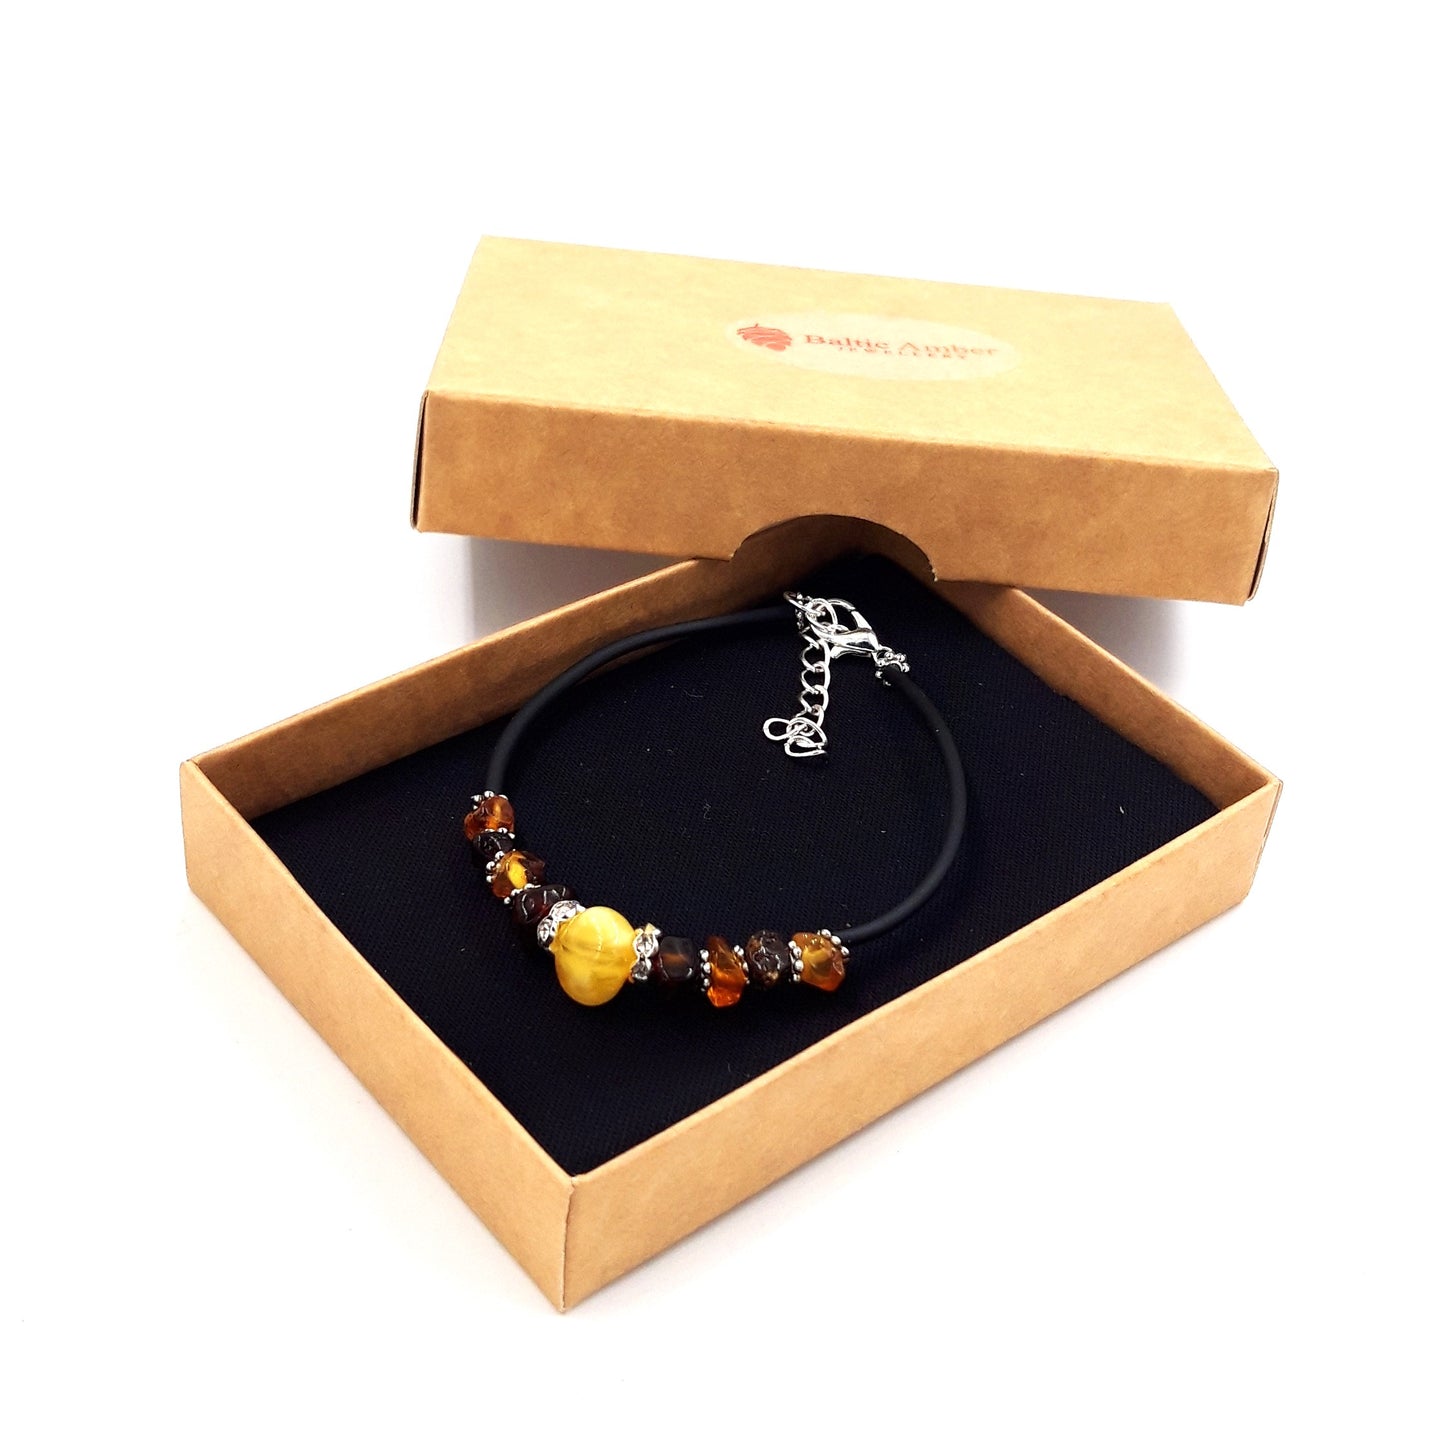 Baltic amber bracelet for adults 1,10,50 and 100units